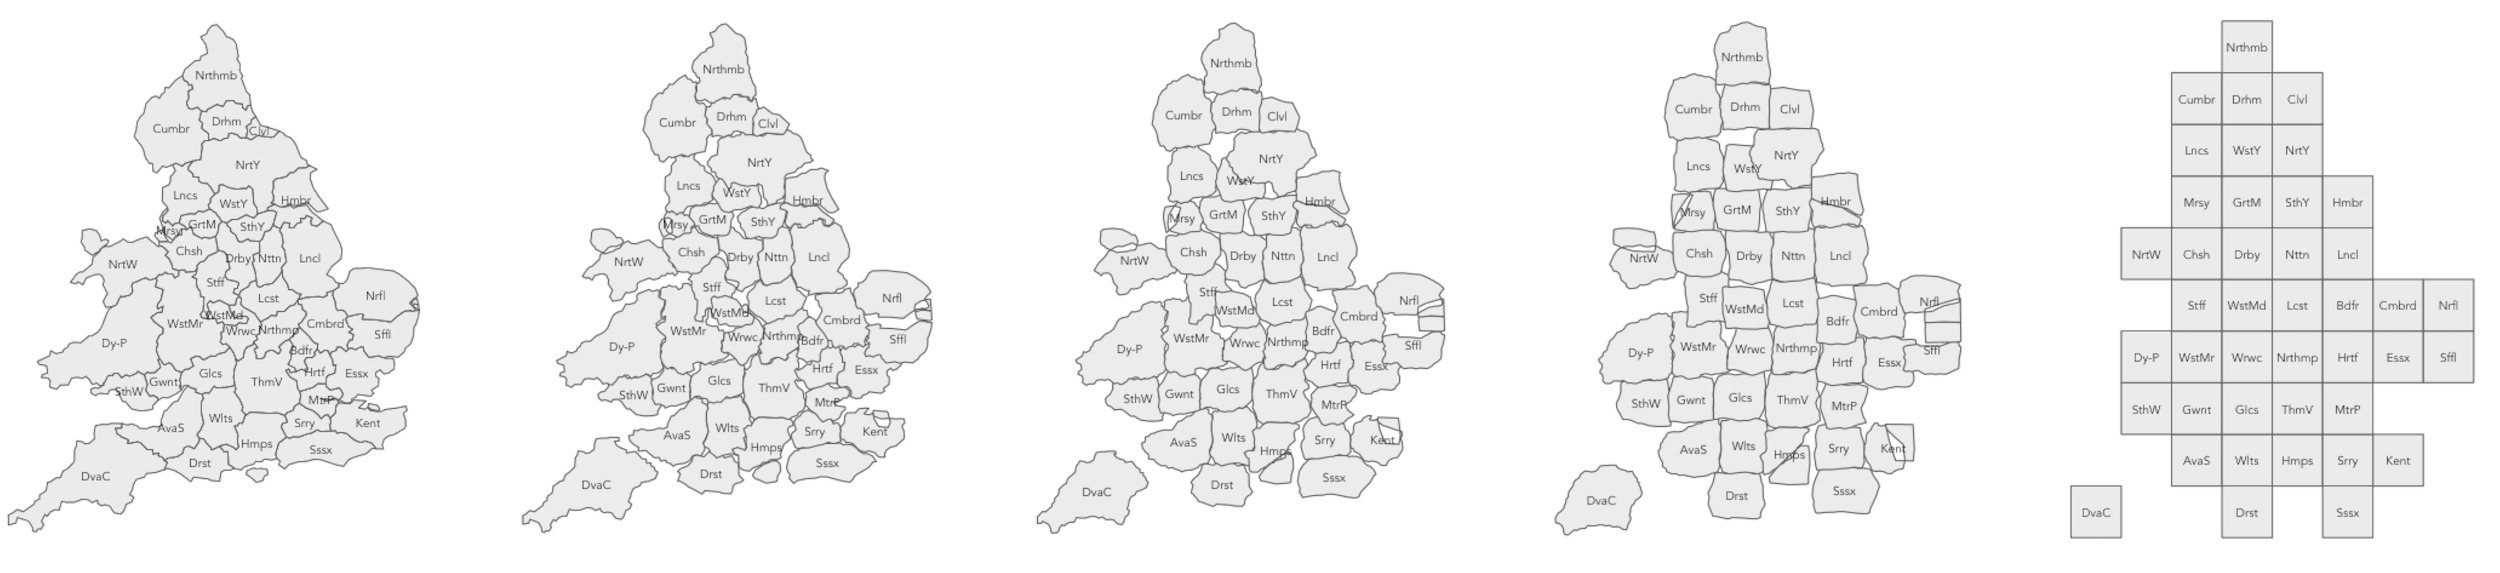 An approximate geographical layout of England and Wales police force areas following the layout algorithm published in Muelmans et al. (2017).